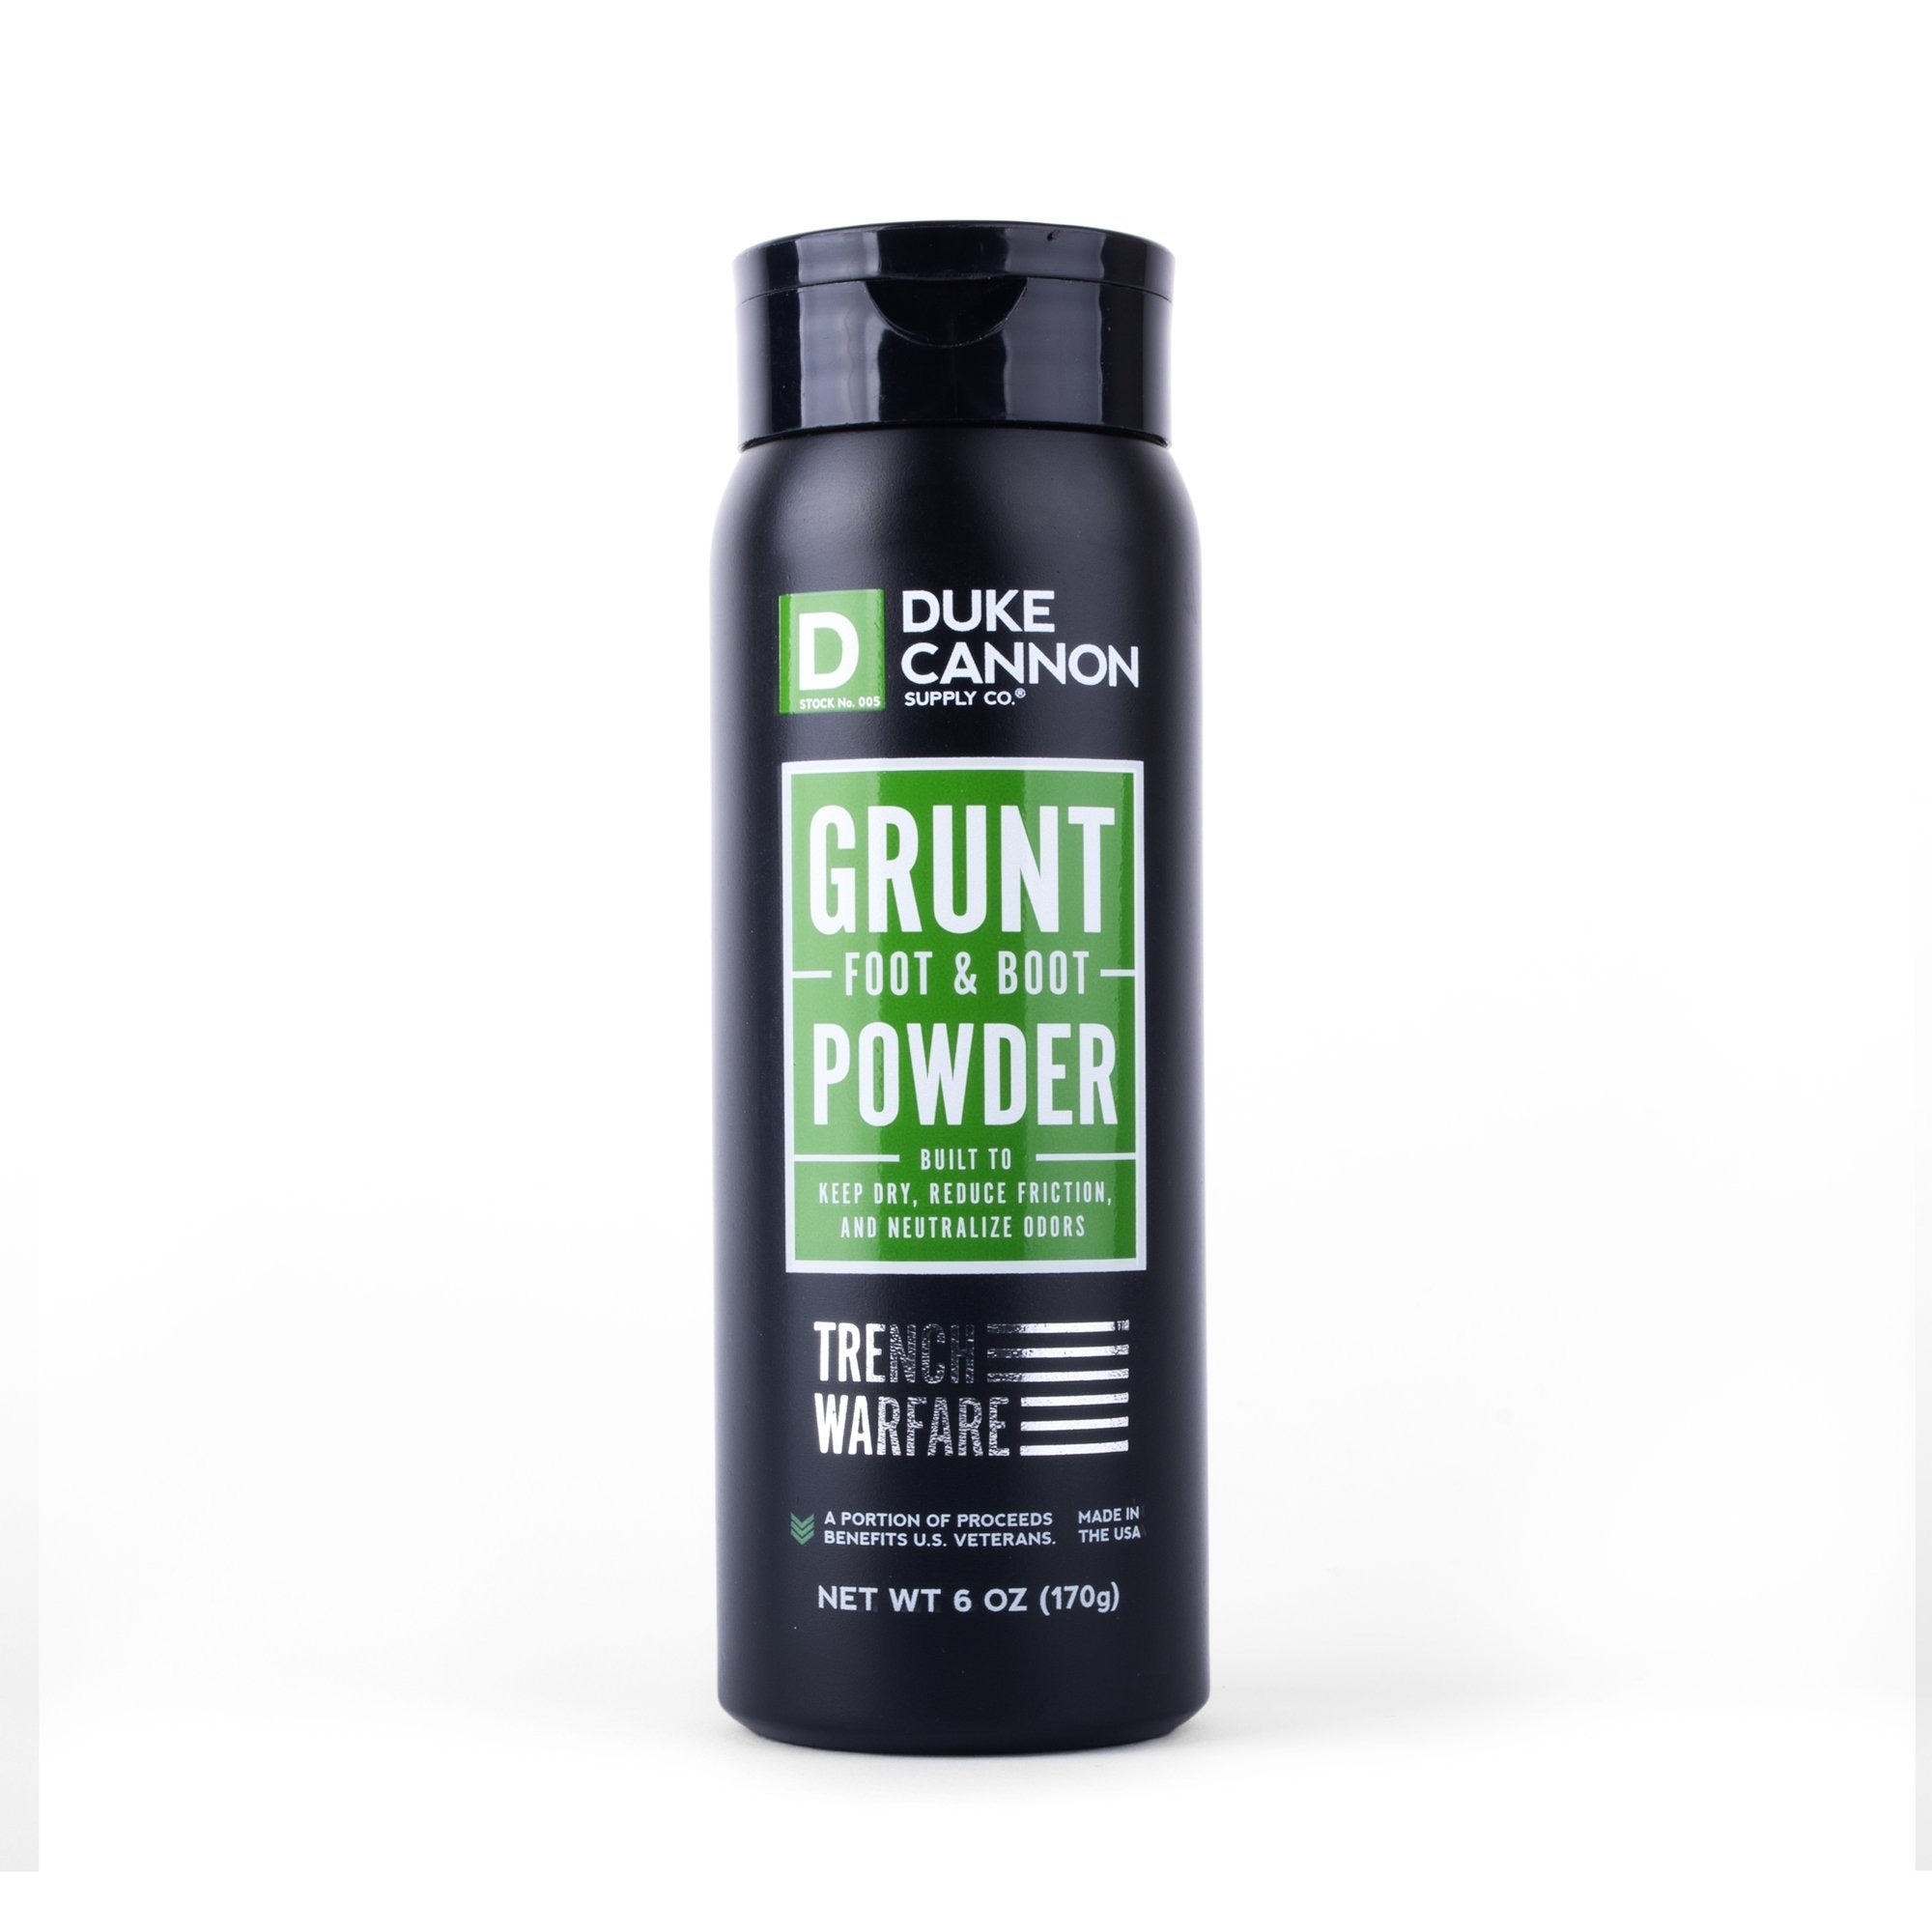 Duke Cannon Grunt Foot And Boot Powder    